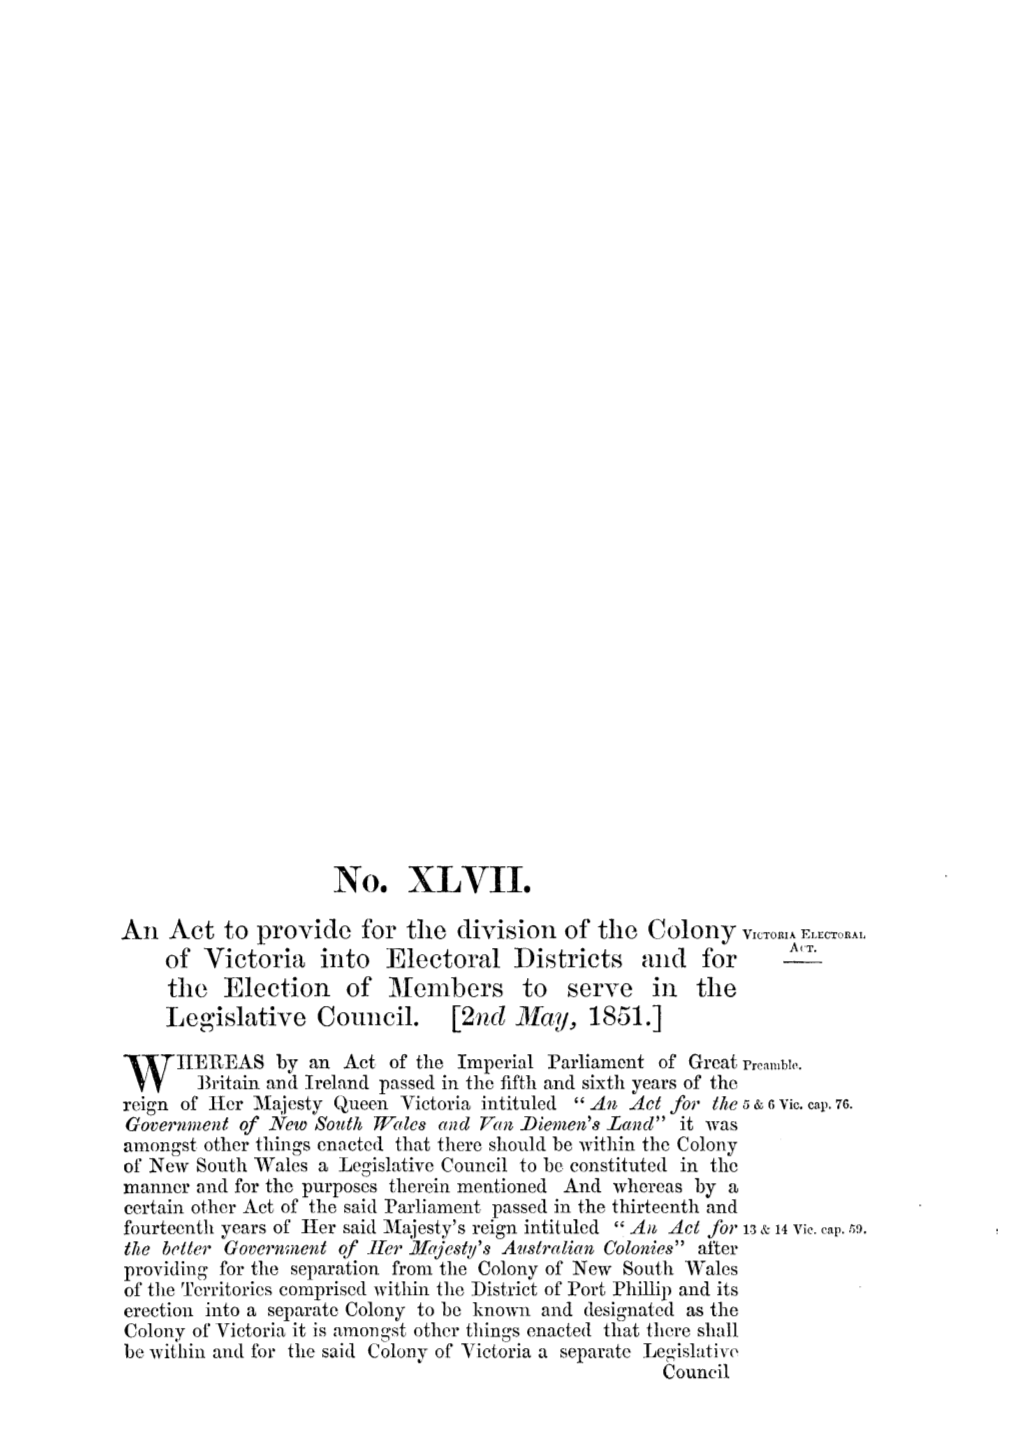 No. XLVII. an Act to Provide for the Division of the Colony of Victoria Into Electoral Districts and for the Election of Members to Serve in the Legislative Council